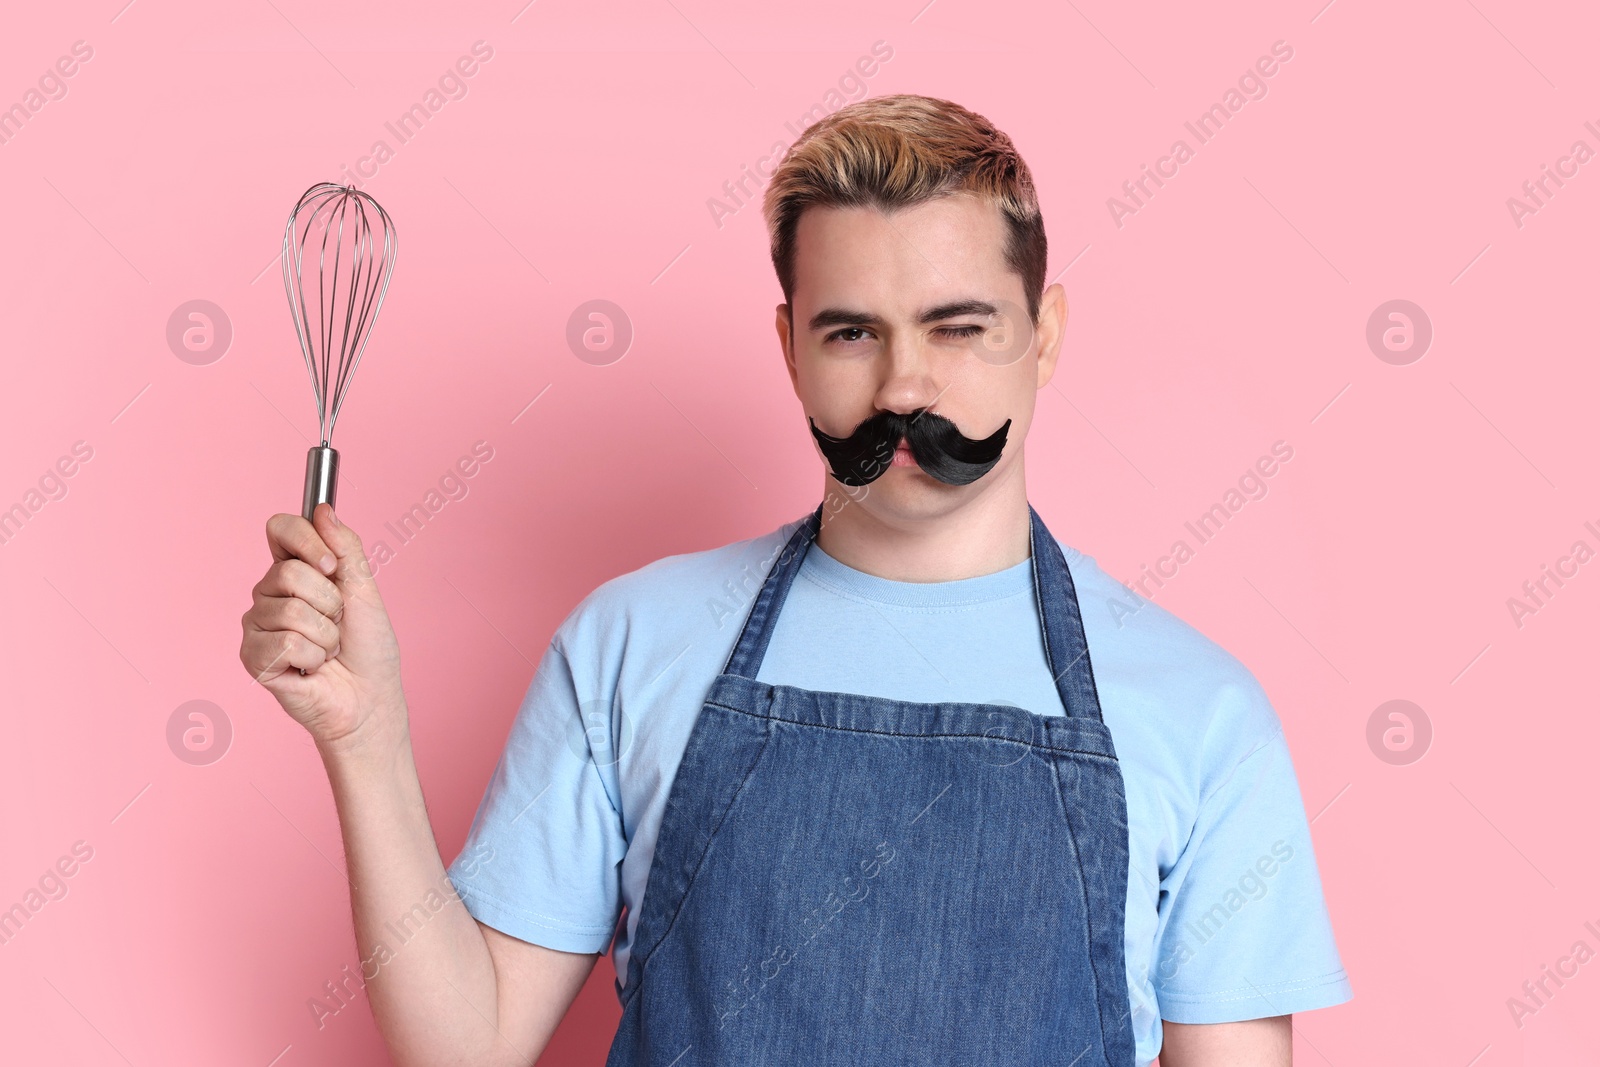 Photo of Portrait of happy confectioner with funny artificial moustache holding whisk on pink background